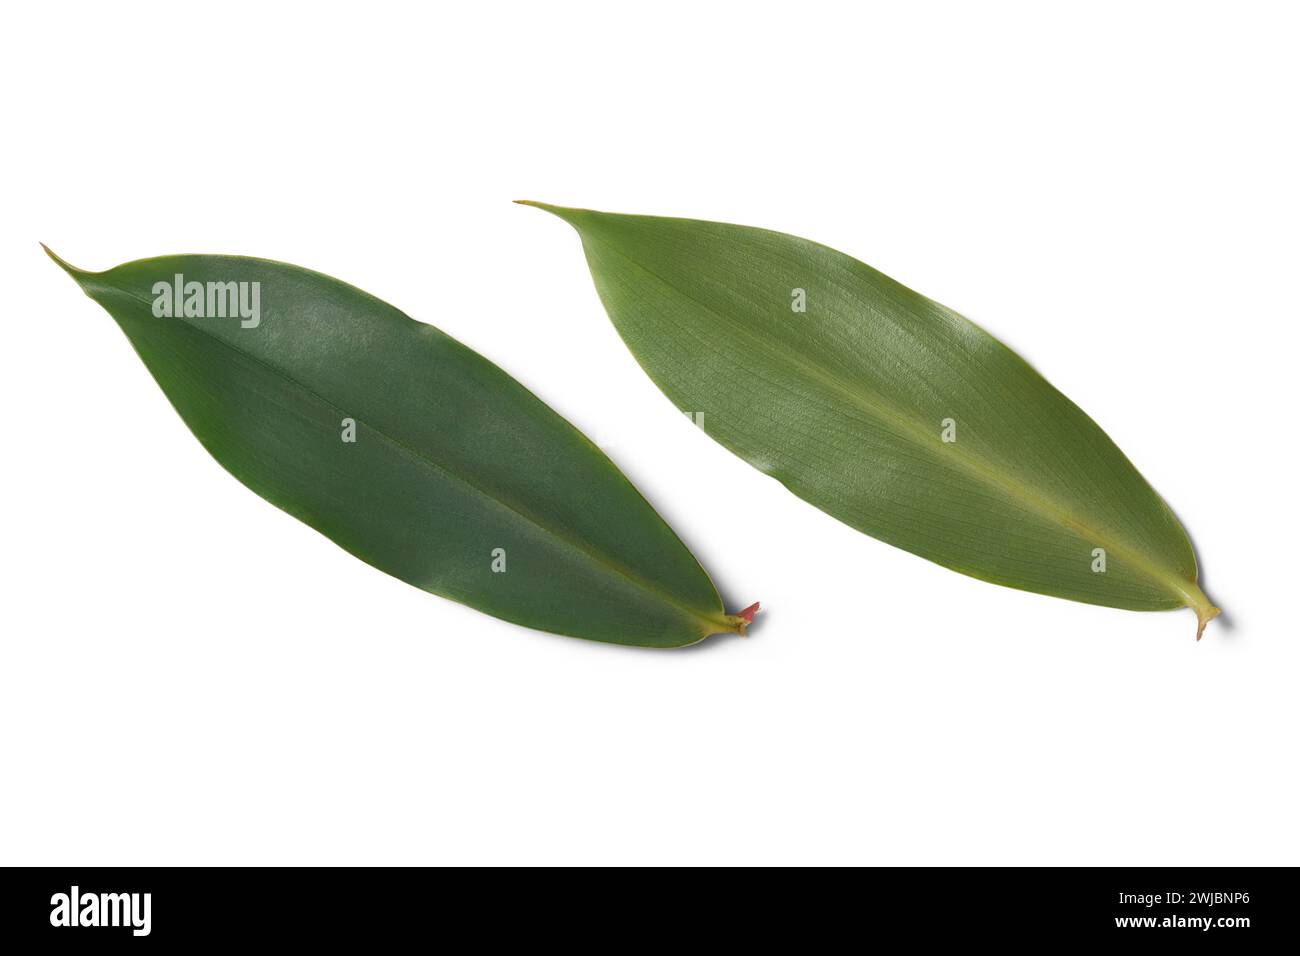 thebu plant leaves, costus speciosus, commonly found in sri lanka and widely used in ayurveda medicine, leaves are beneficial for control blood sugar Stock Photo